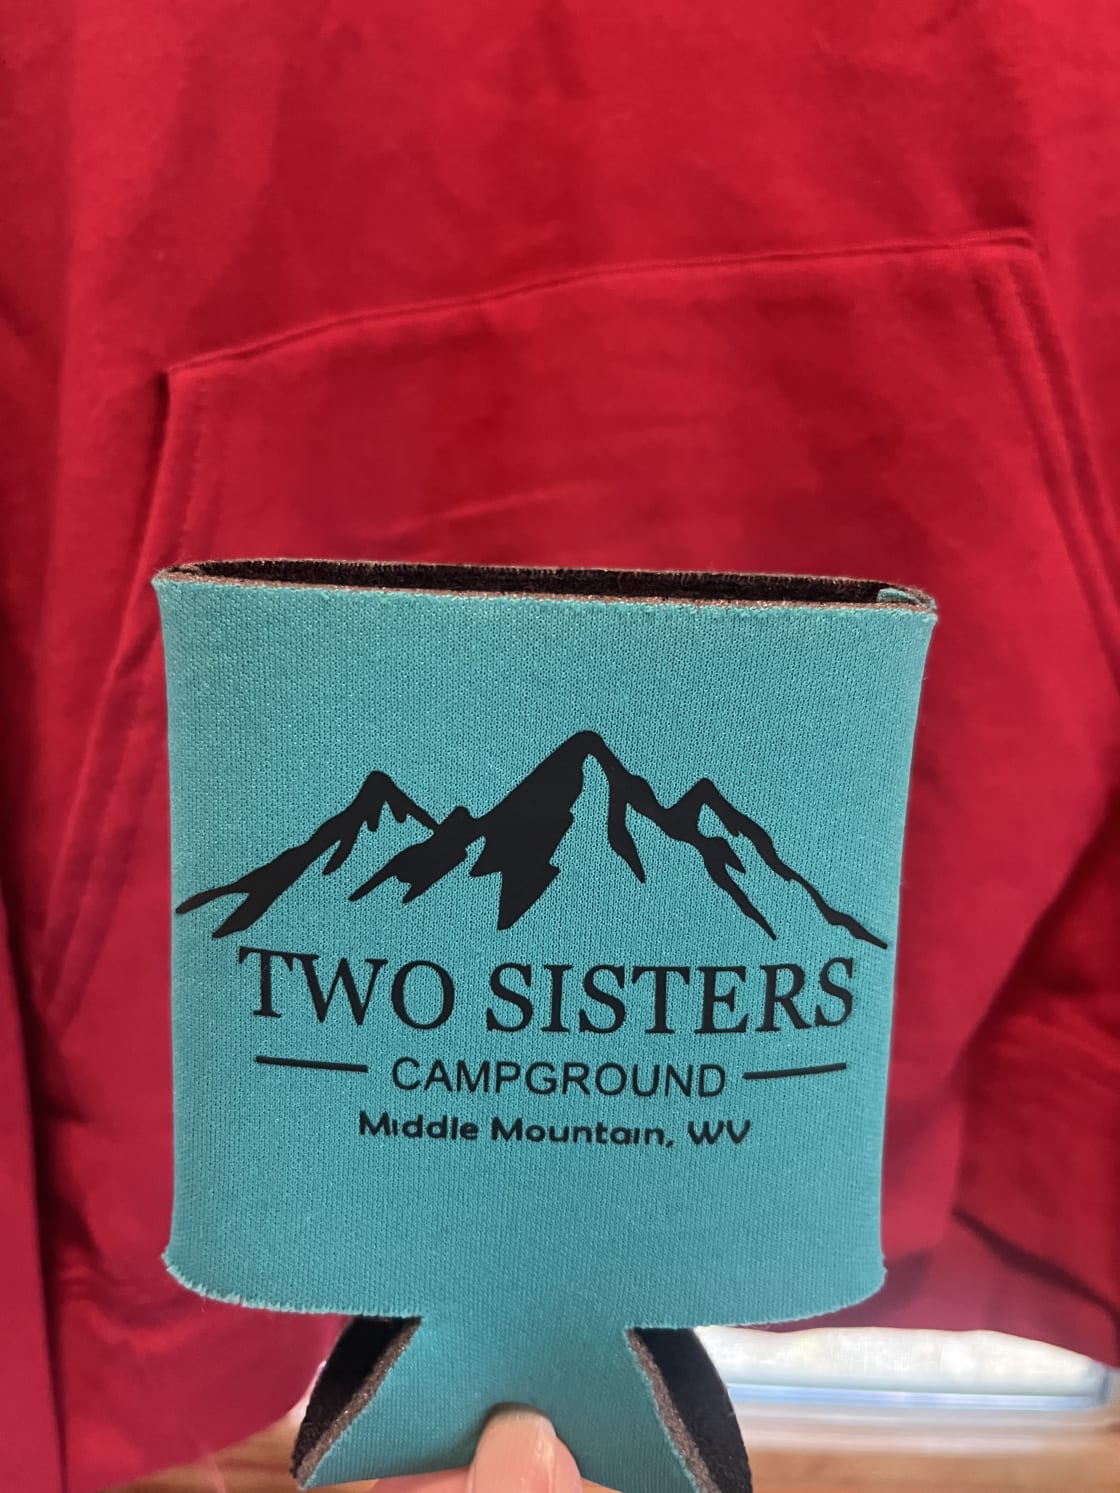 Two sisters campground gear